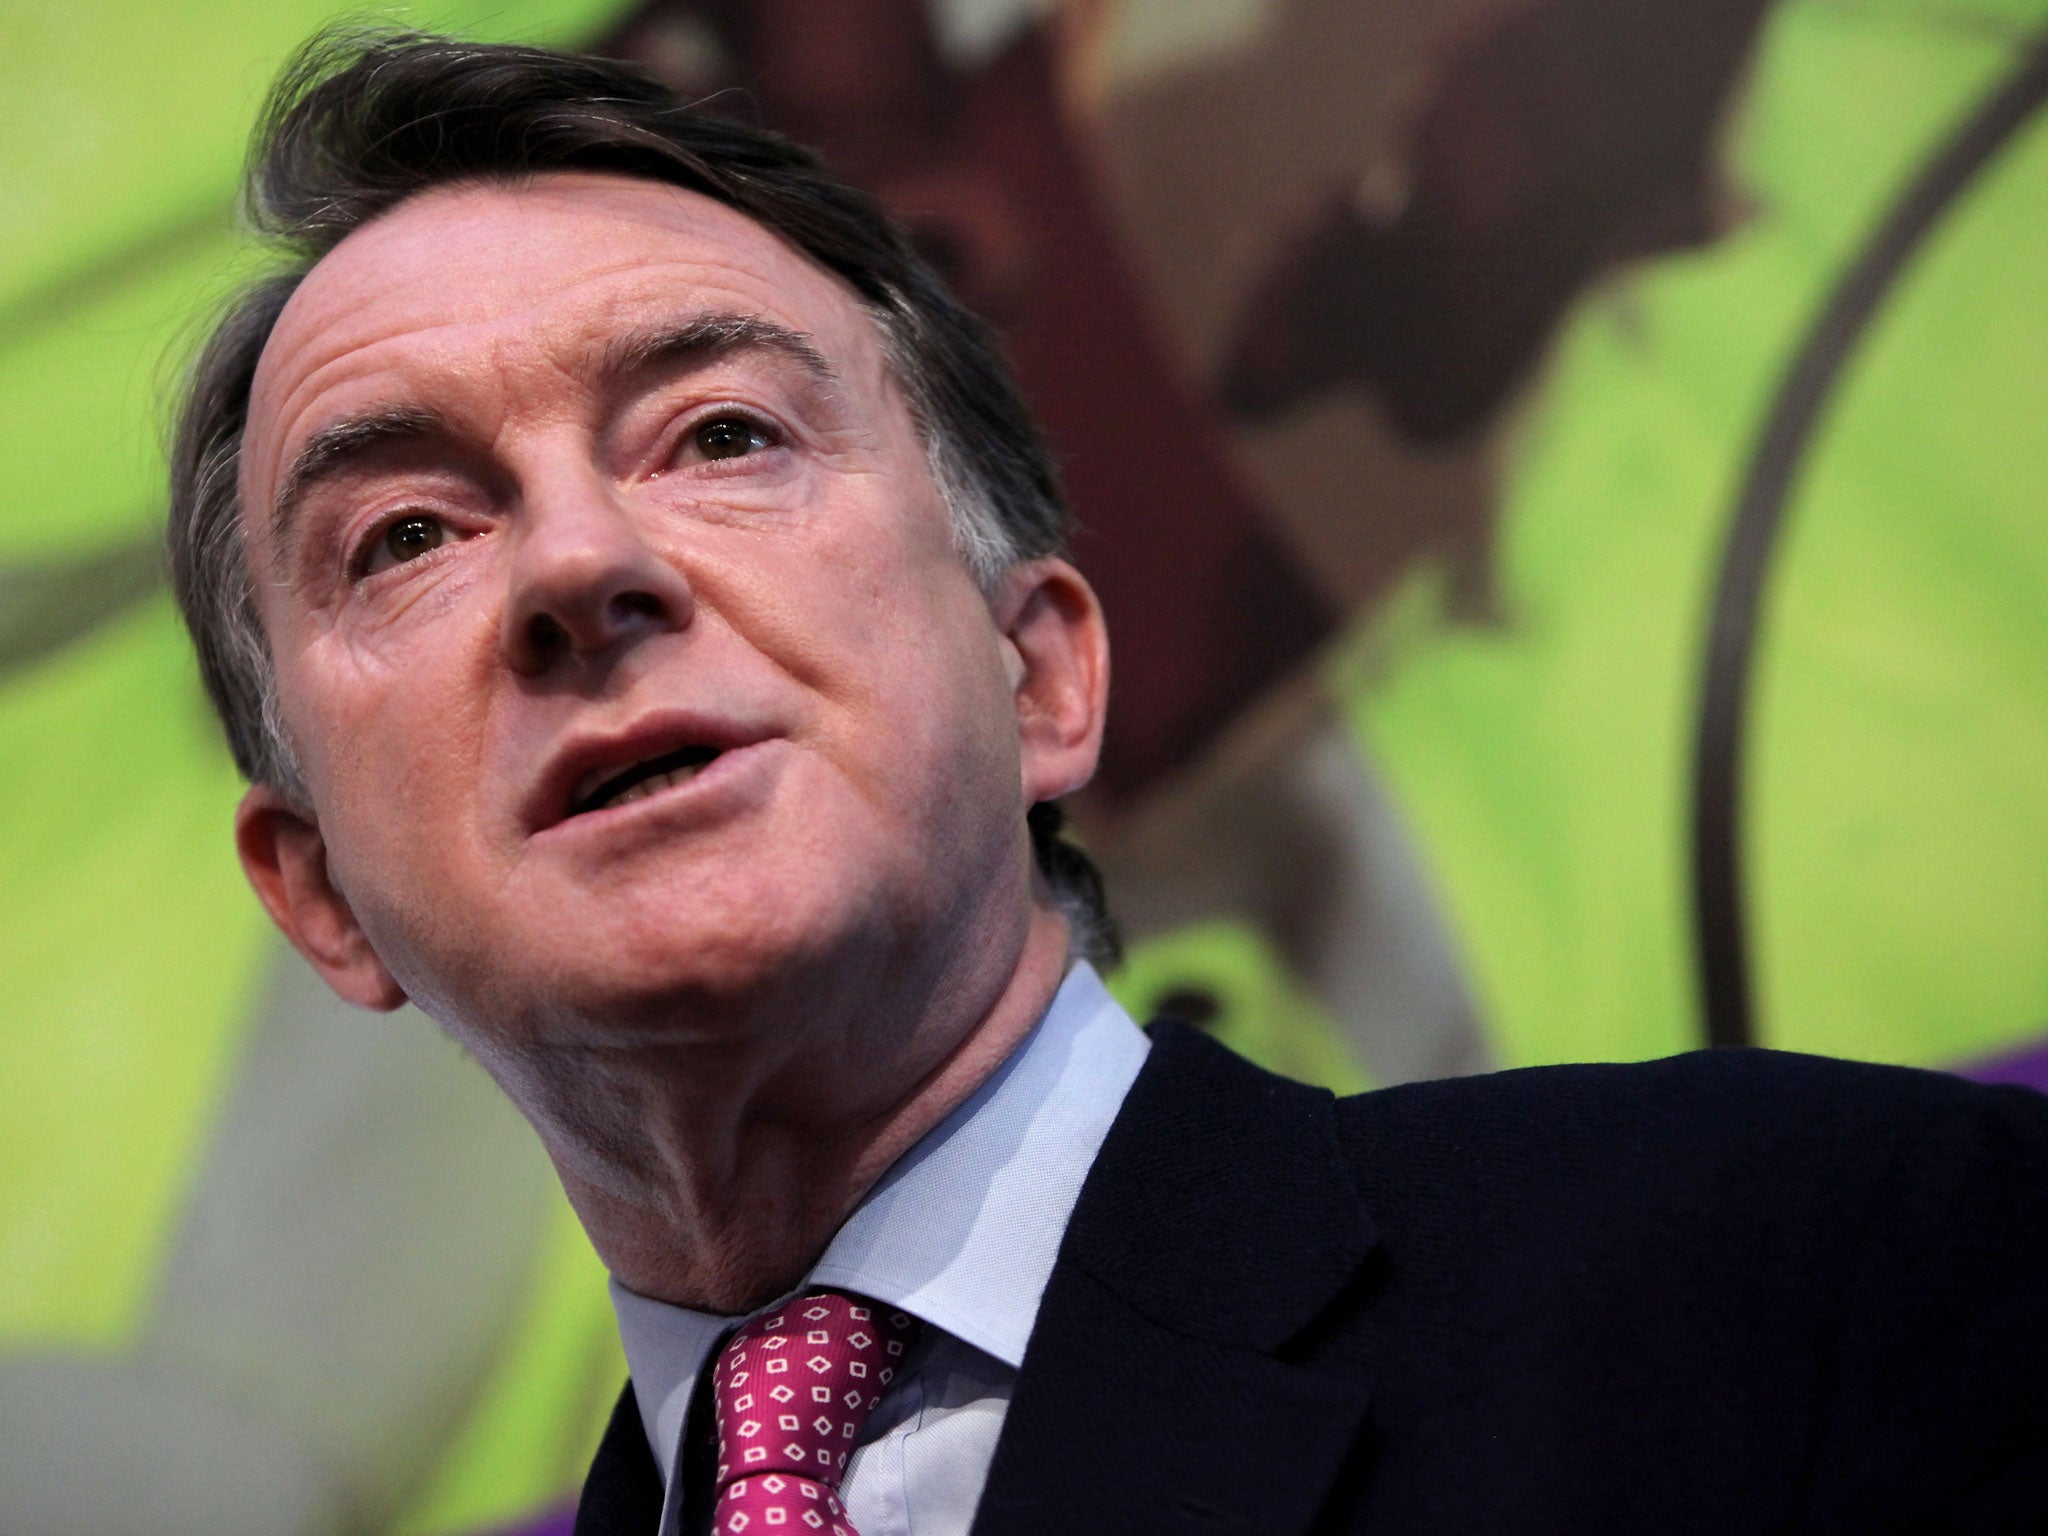 Lord Mandelson, thinking about what the coming year might hold